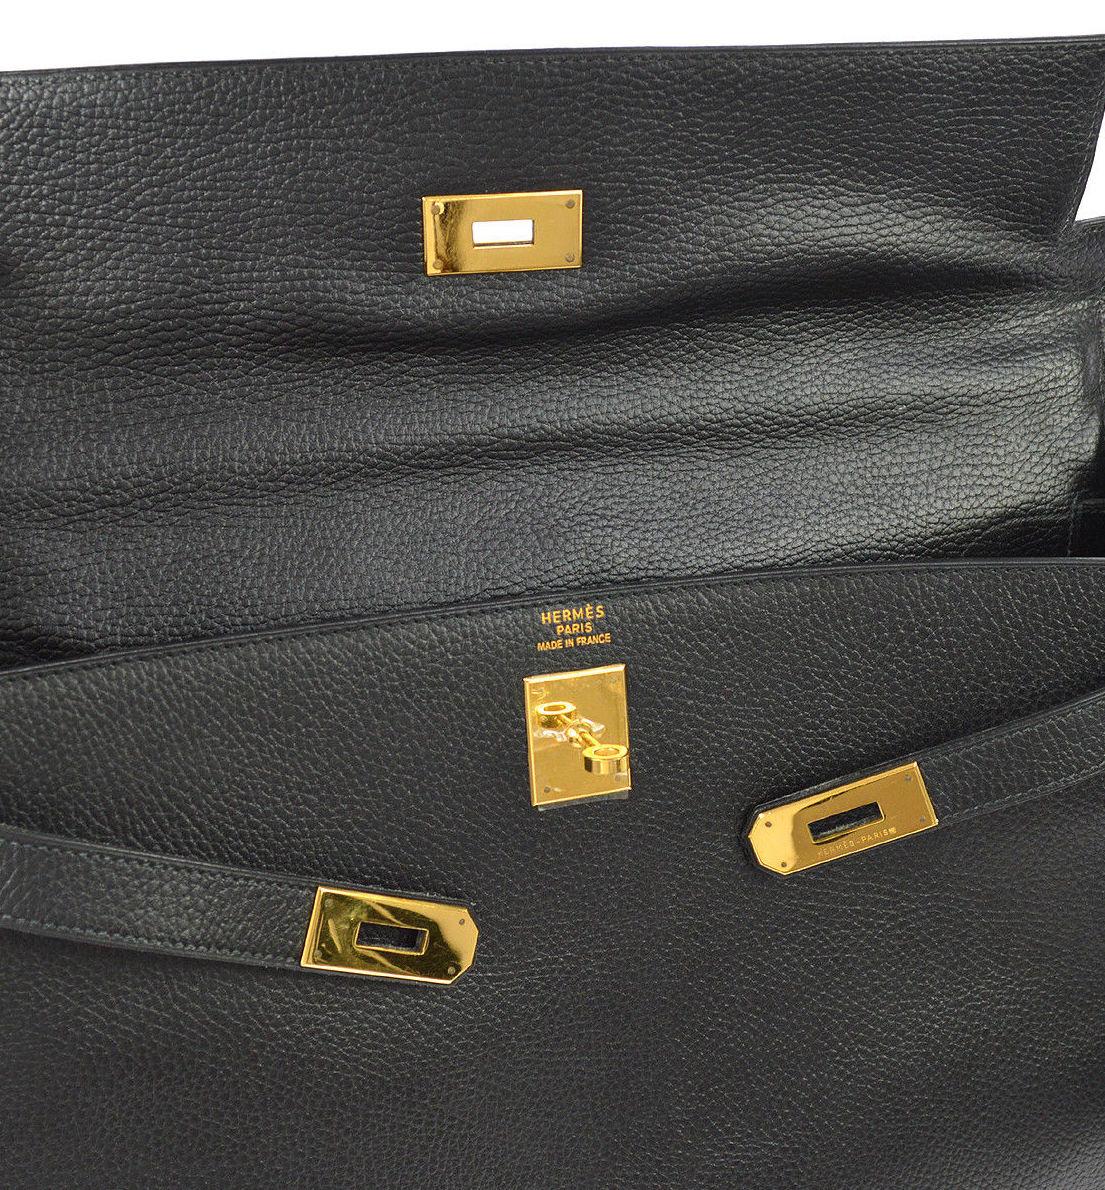 Hermes Kelly 40 Black Leather Men's Women's Top Handle Satchel Carryall Tote Bag

Leather
Gold tone hardware
Leather lining
Made in France
Handle drop 4